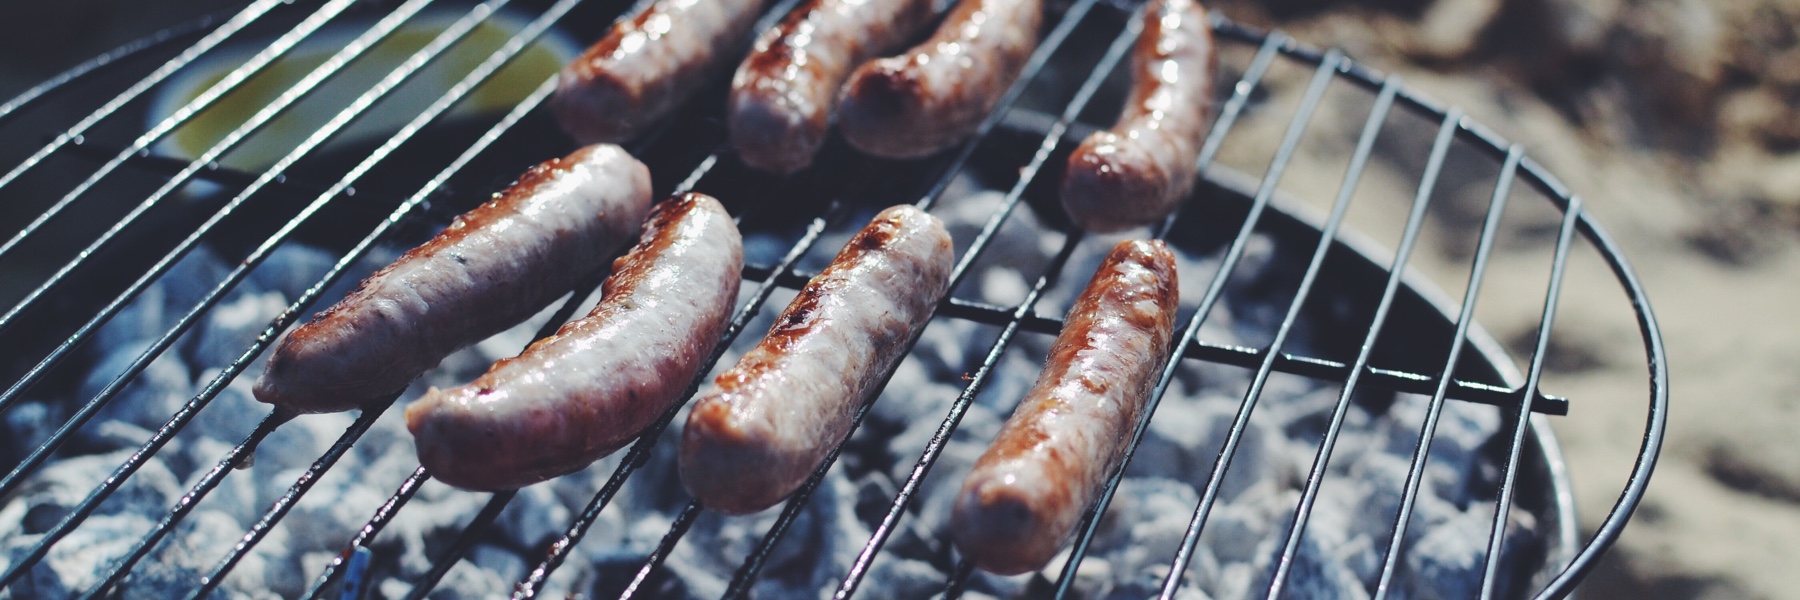 Sausages cooking on a charcoal grill